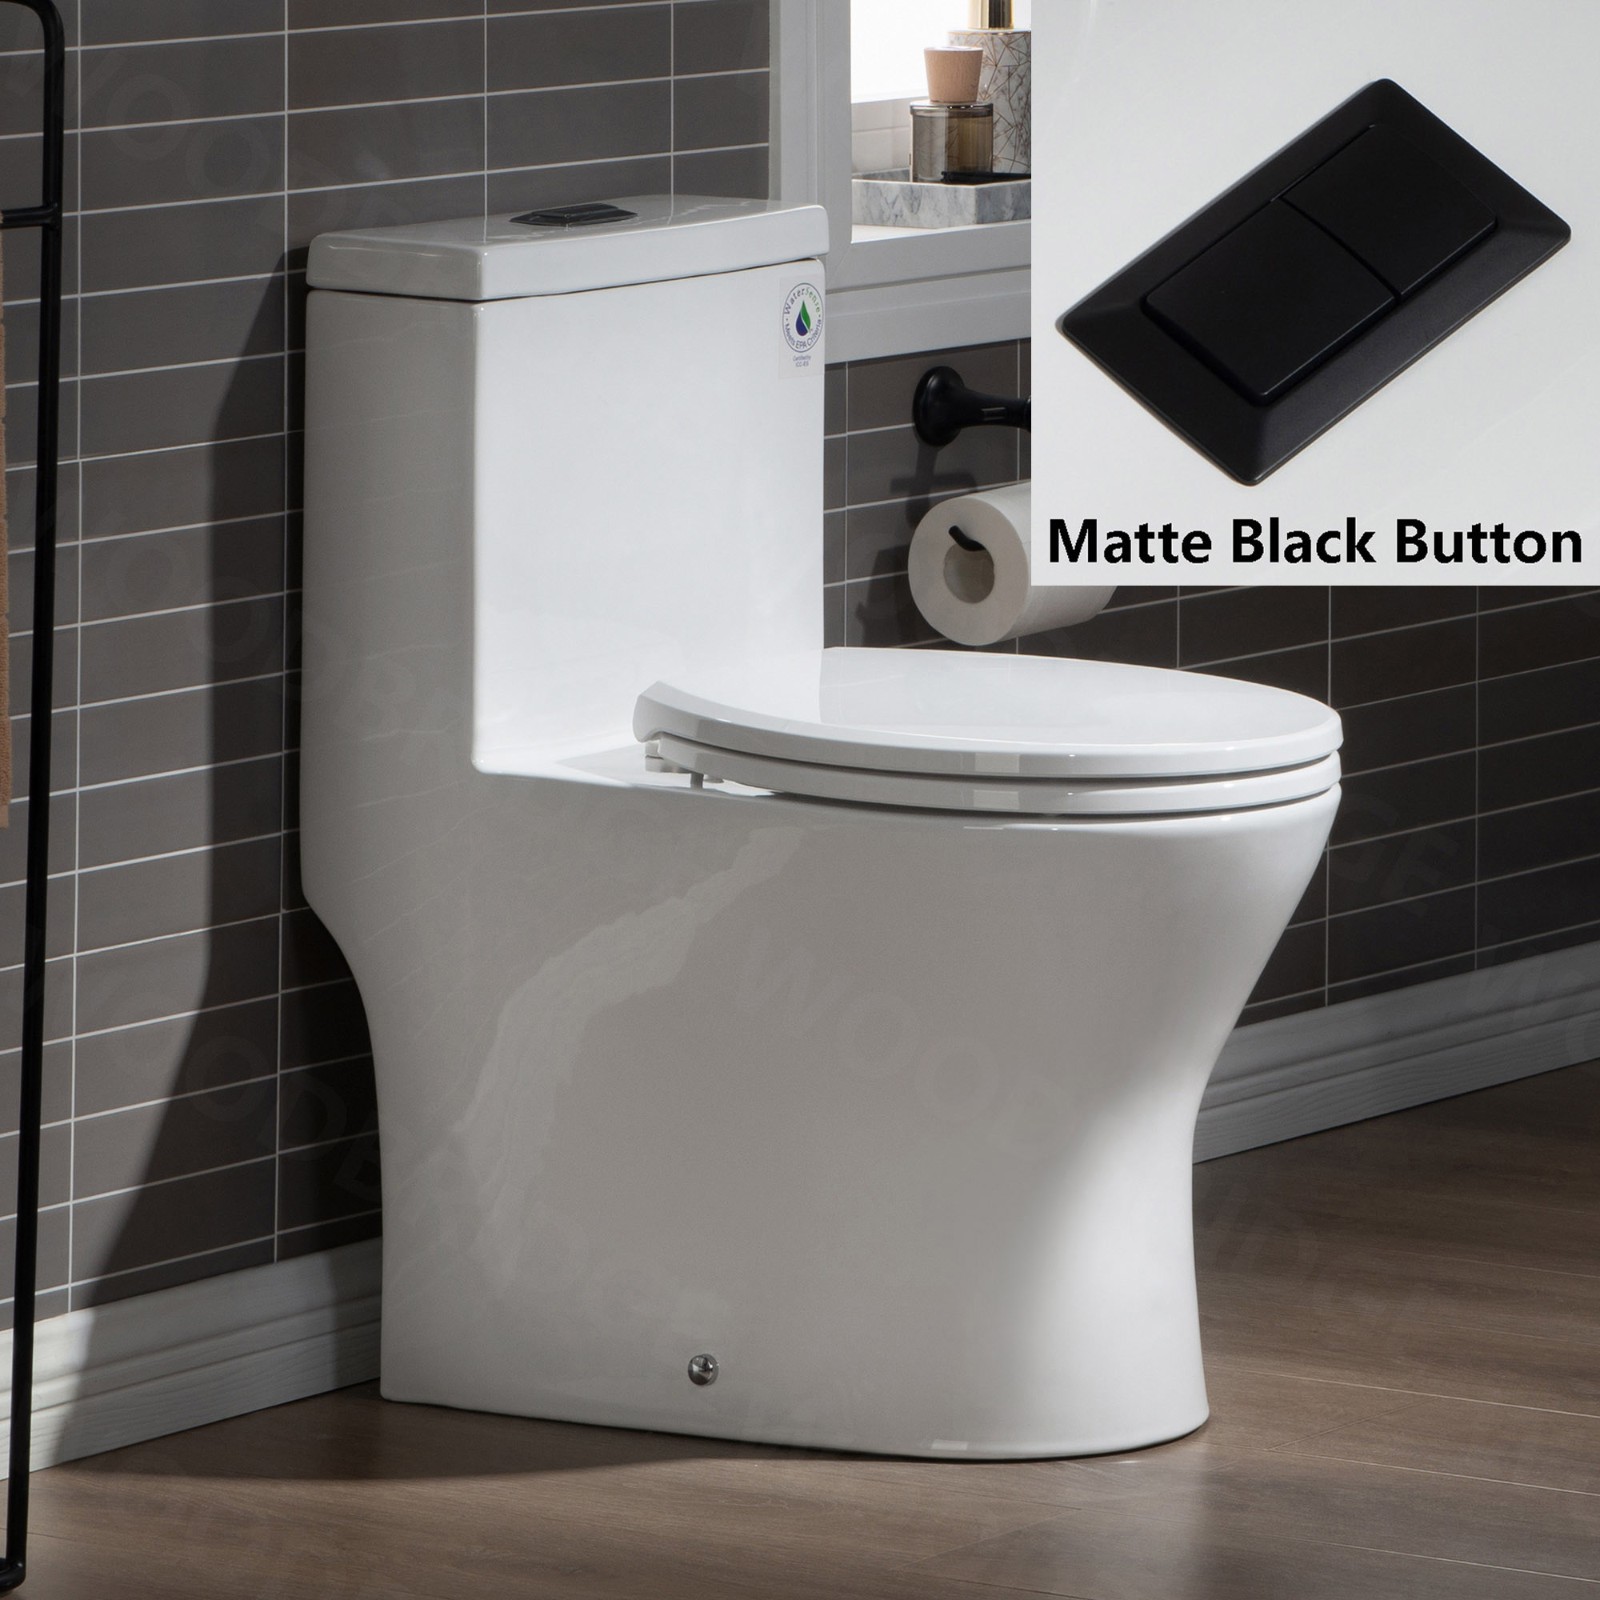  WOODBRIDGE One Piece Short Compact Bathroom Tiny Mini Commode Water Closet Dual Flush Concealed Trapway, Matte Black Button B0500-MB, White_7611